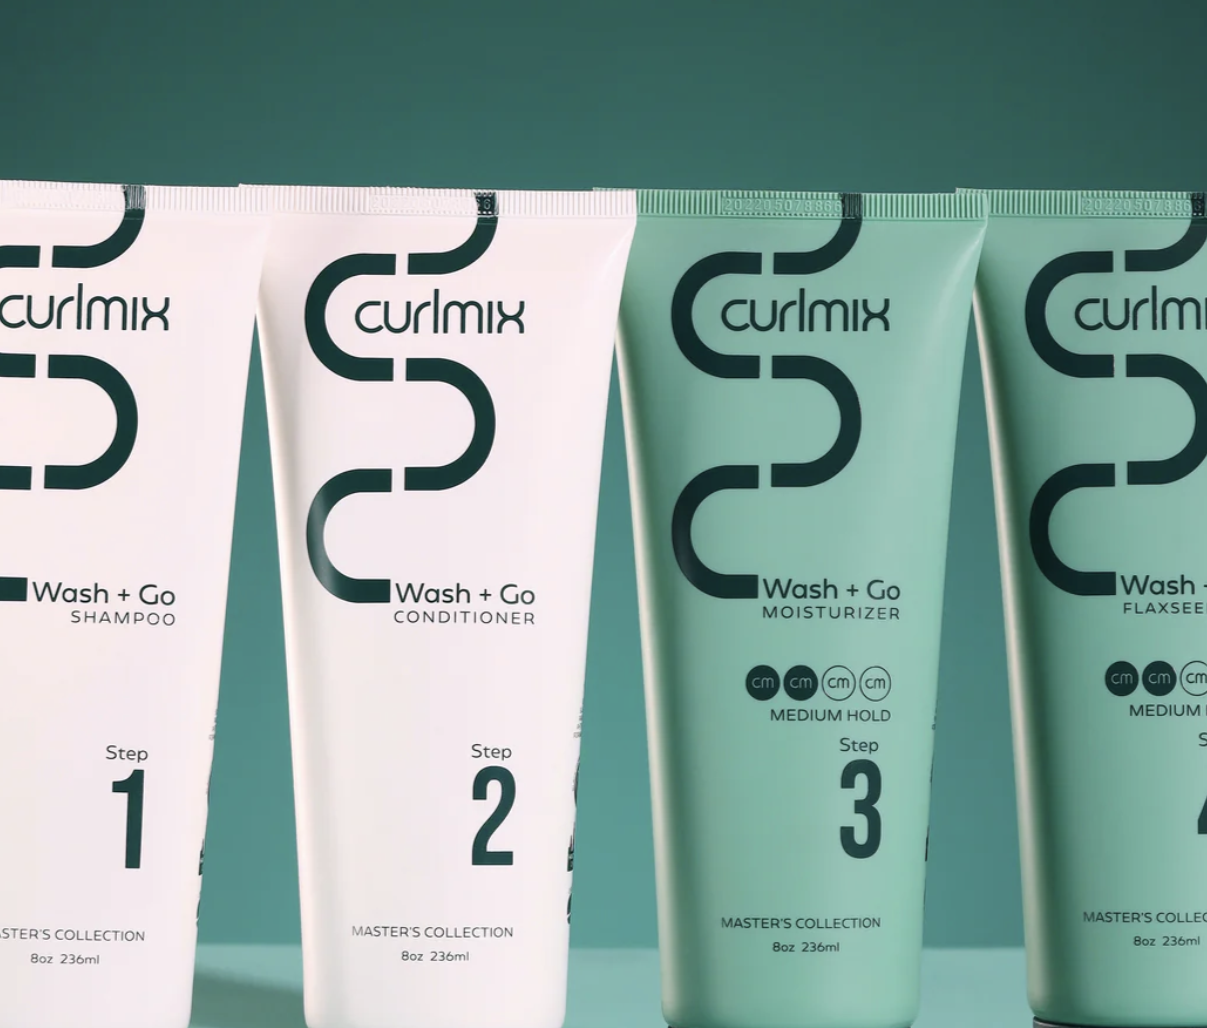 The Curlmix four-step wash and go hair products